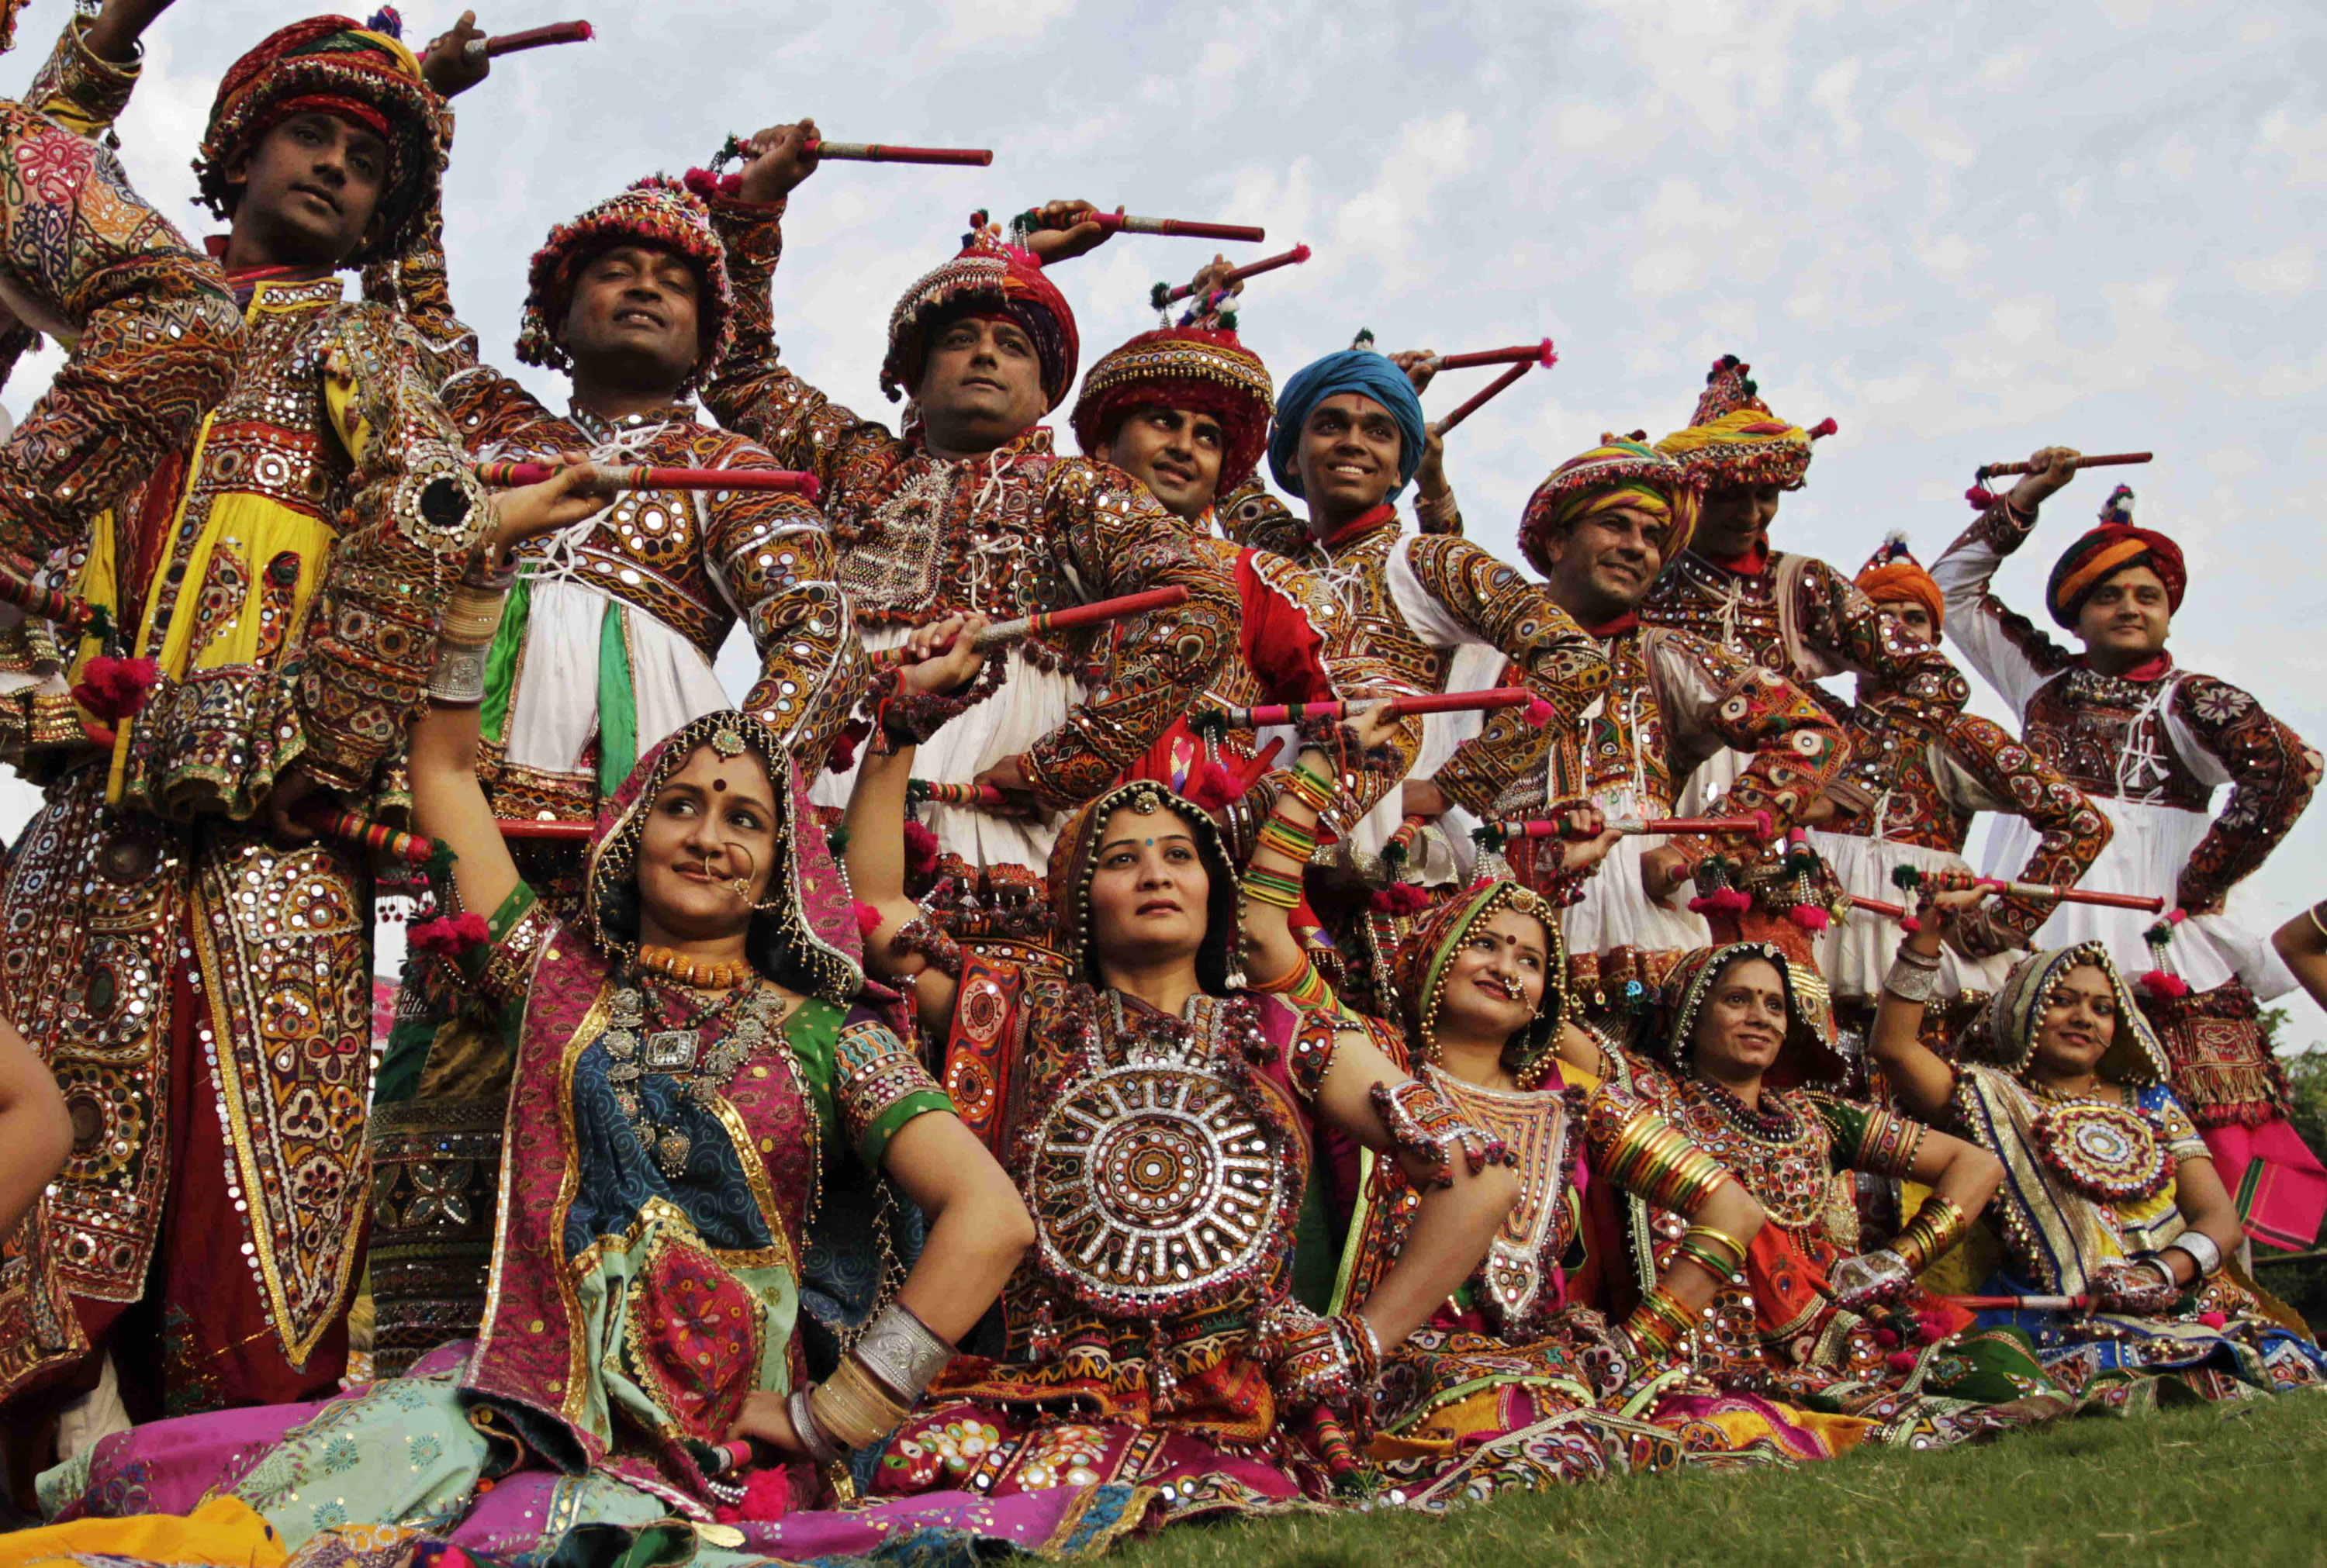 9 Reasons Why Navratri Is Everyones Favorite Festival All Events In City